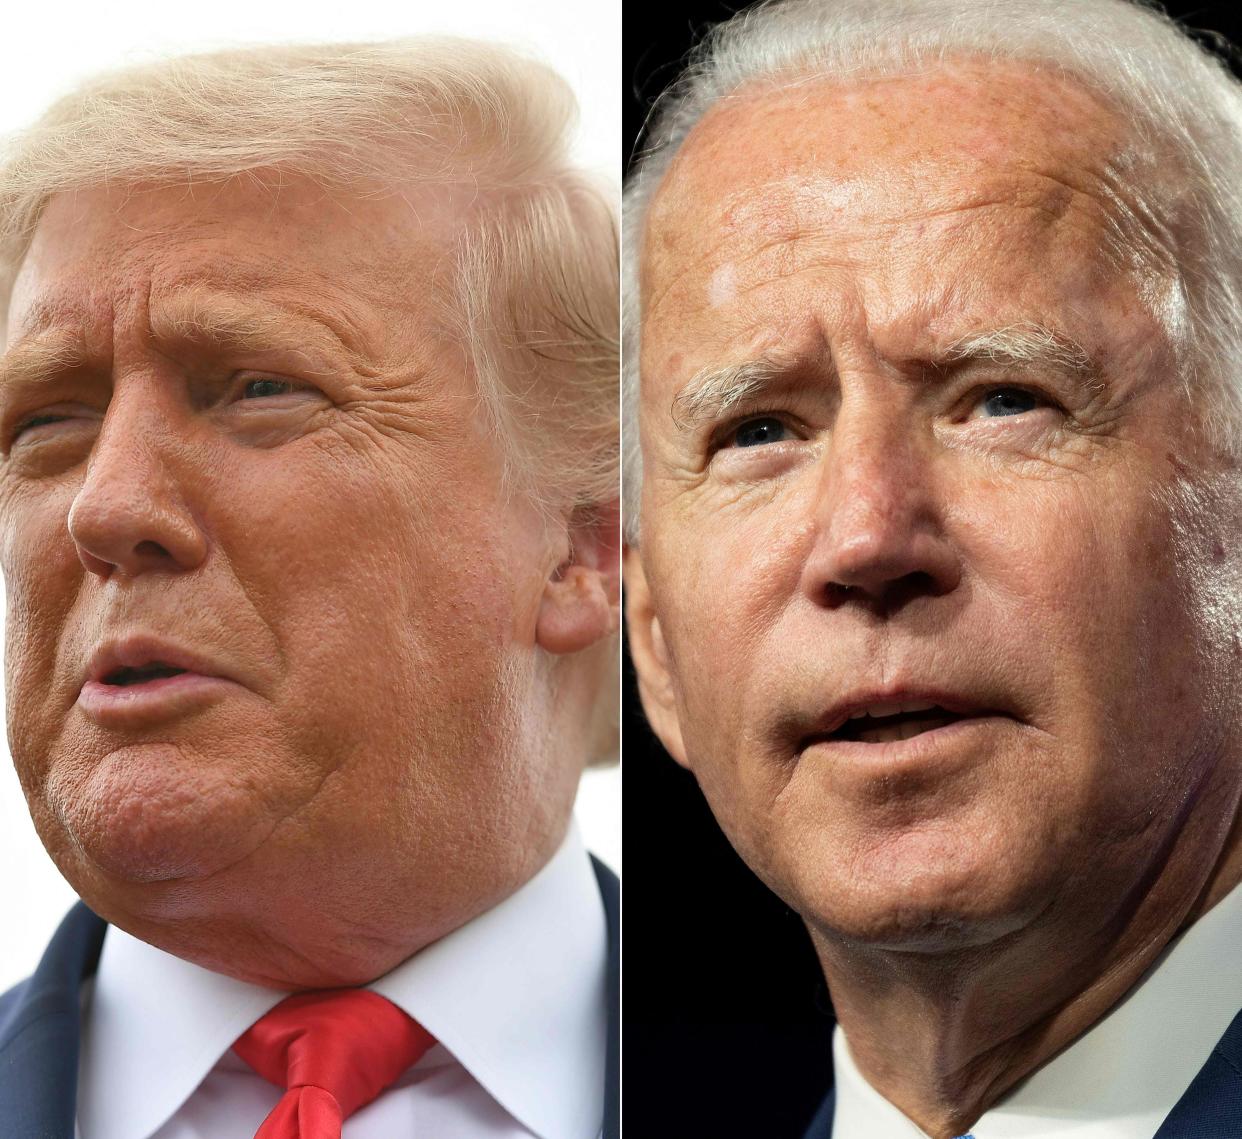 Democratic presidential candidate Joe Biden and President Donald Trump will face each other in the first presidential debate on 29 September. (AFP via Getty Images)